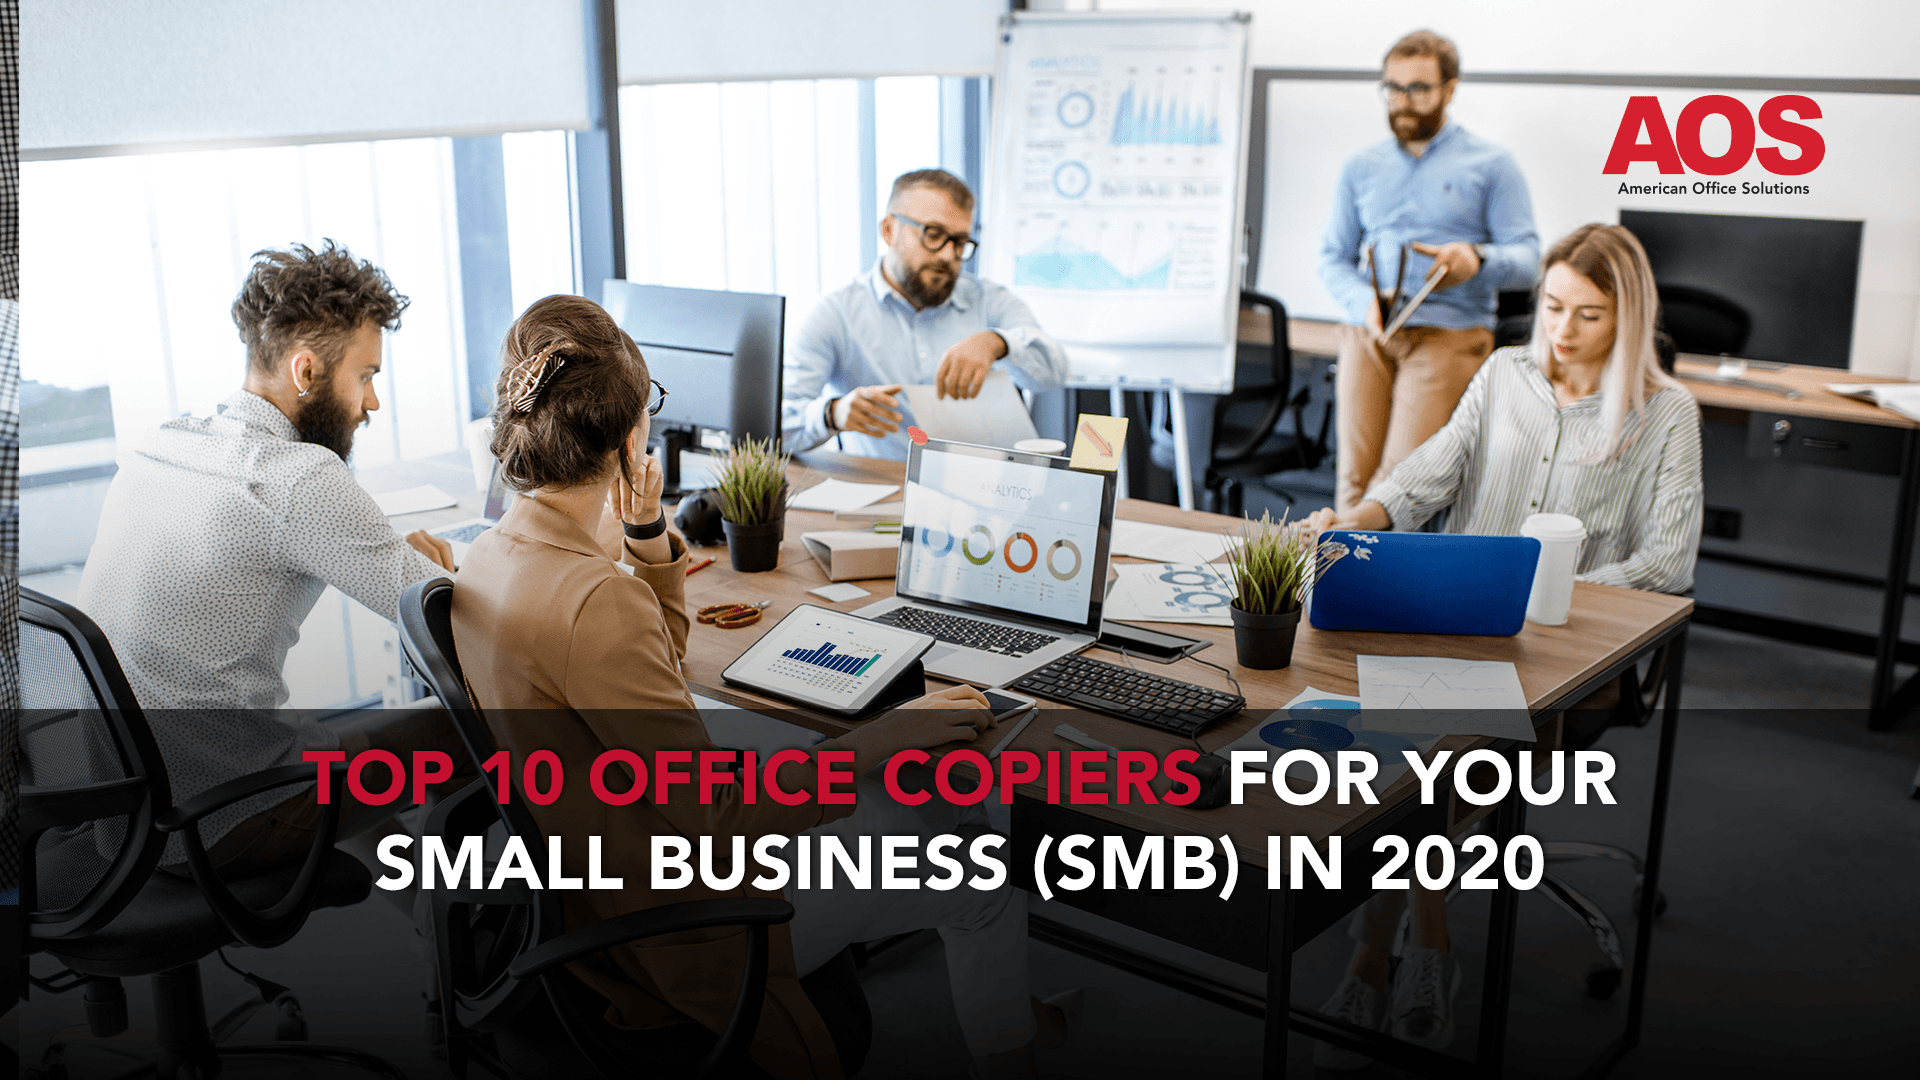 Top 10 Office Copiers For Your Small Business (SMB) in 2020